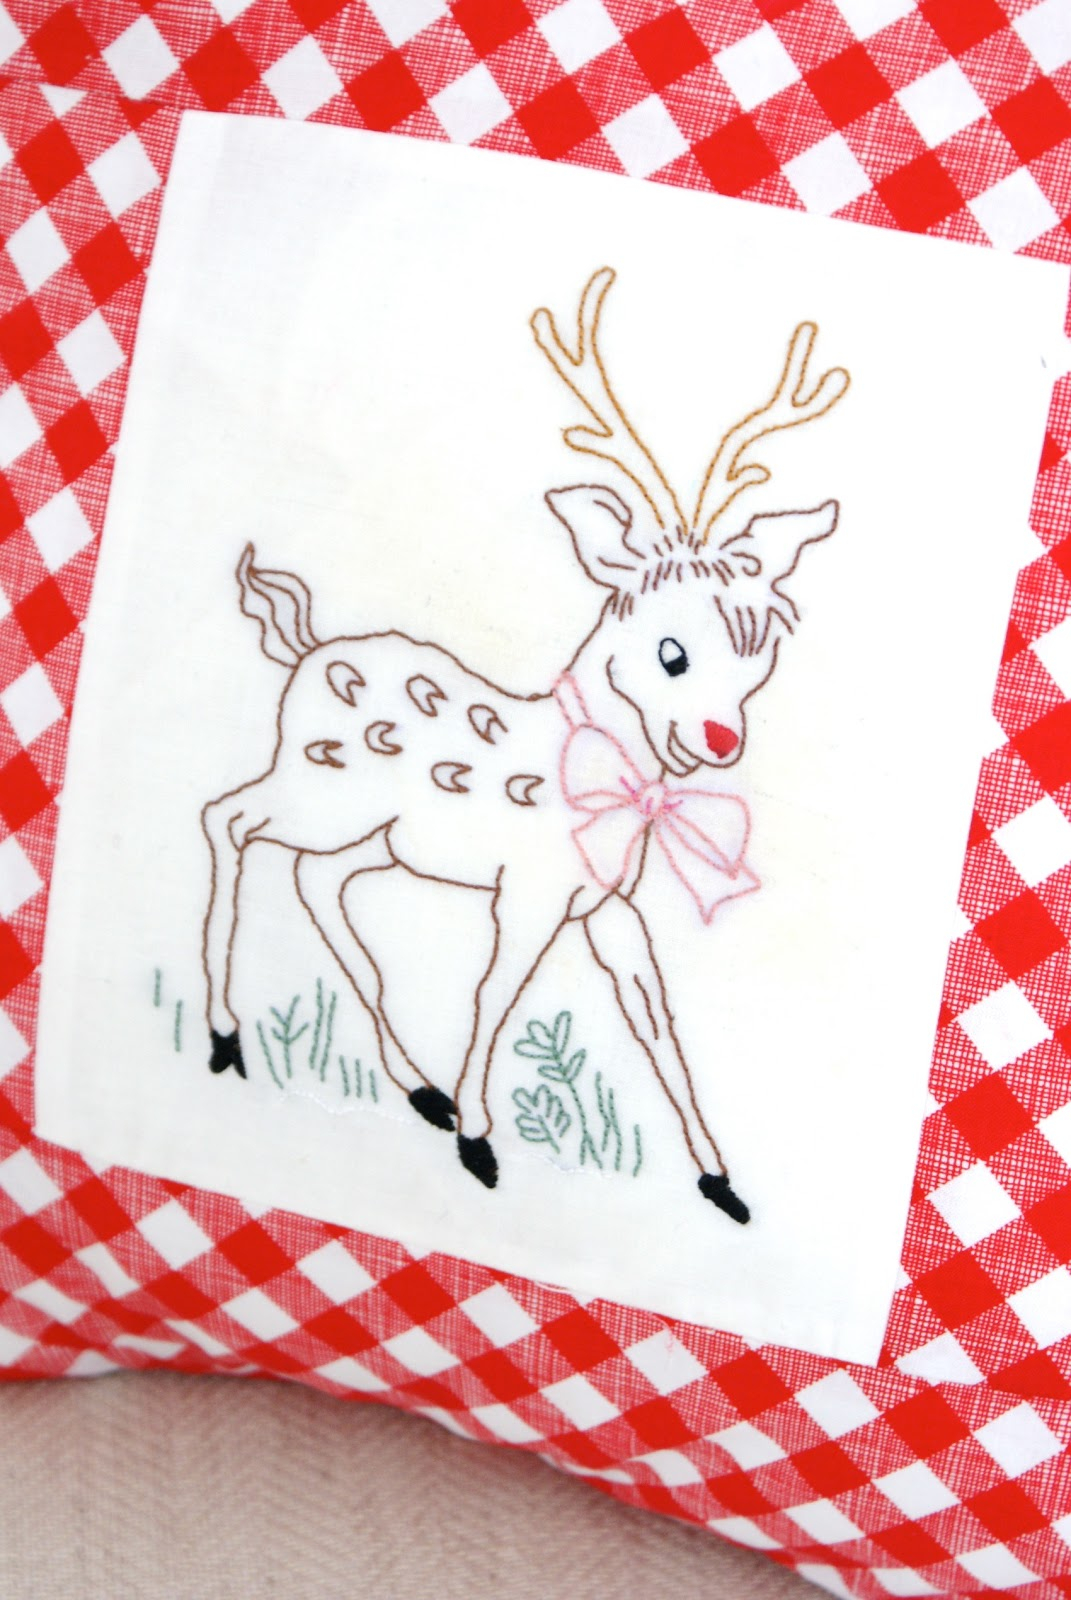 Embroidery Patterns Christmas Messyjesse A Quilt Blog Jessie Fincham Christmas Reindeer